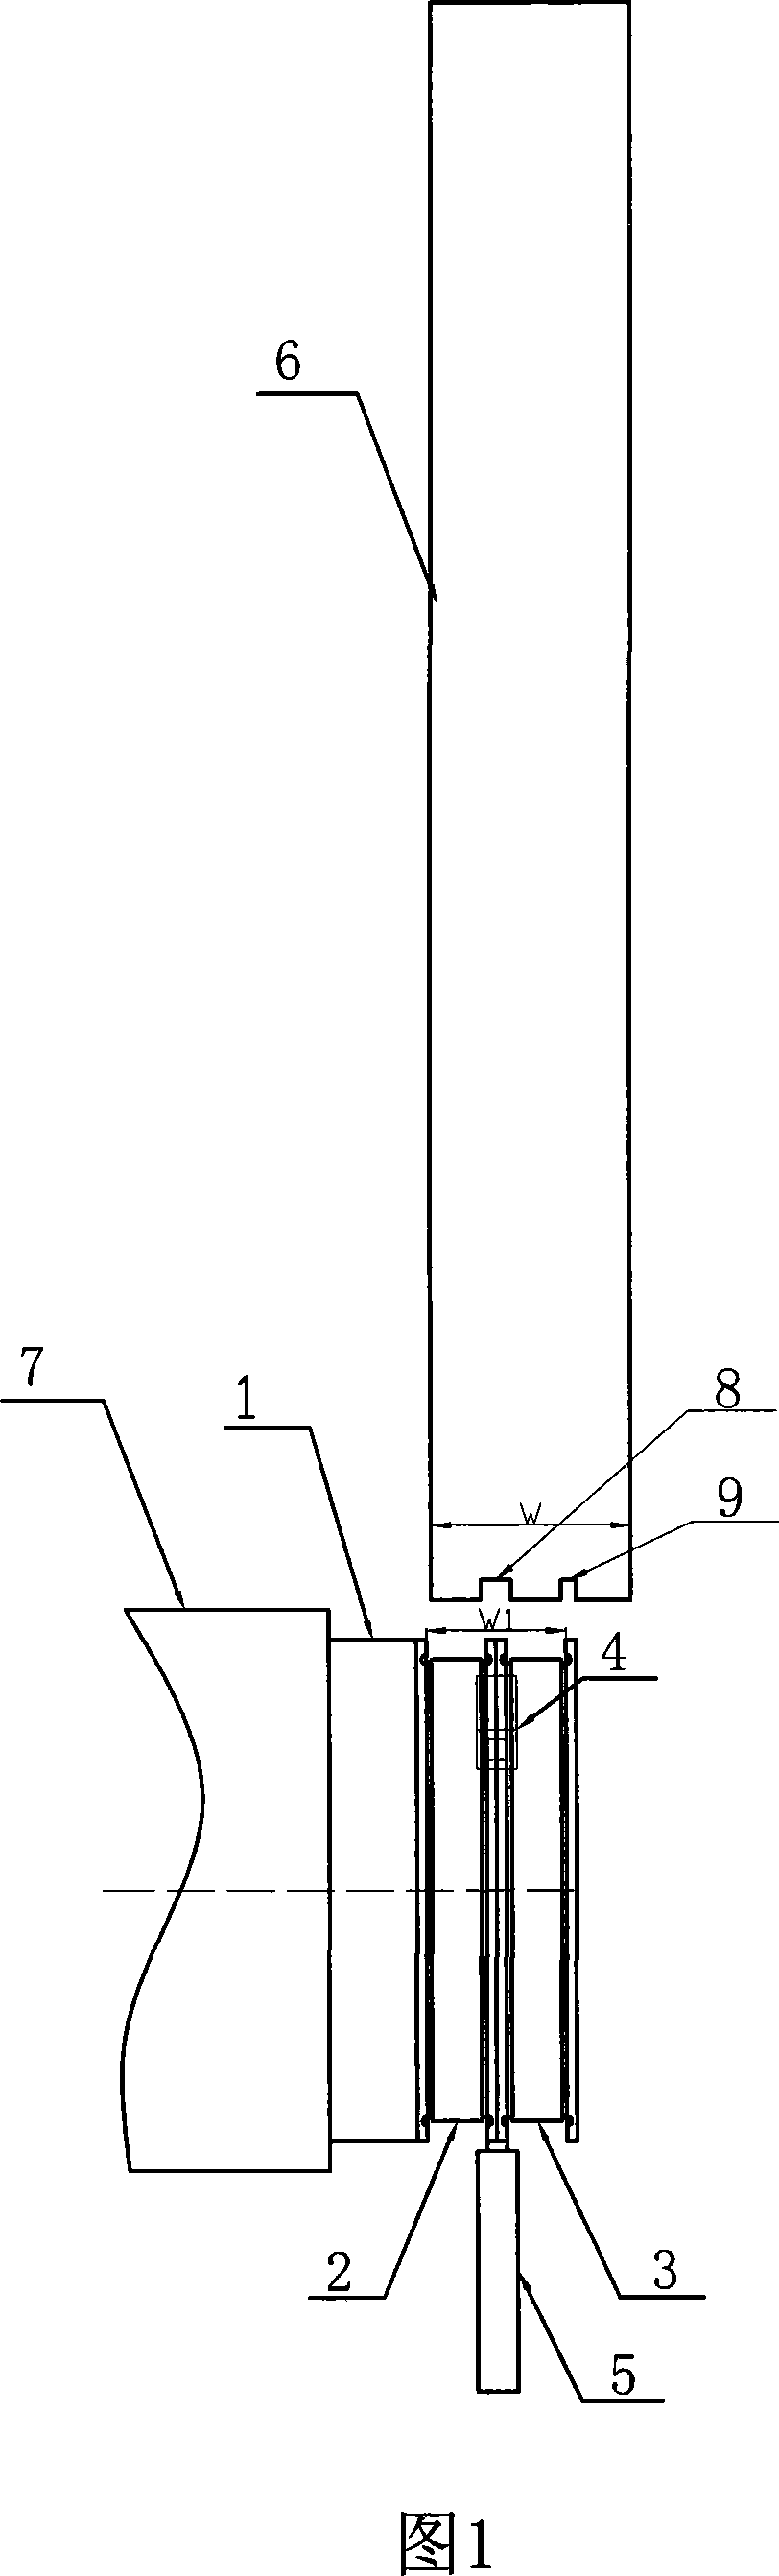 Method for processing two column internal ball tracks by one grinding